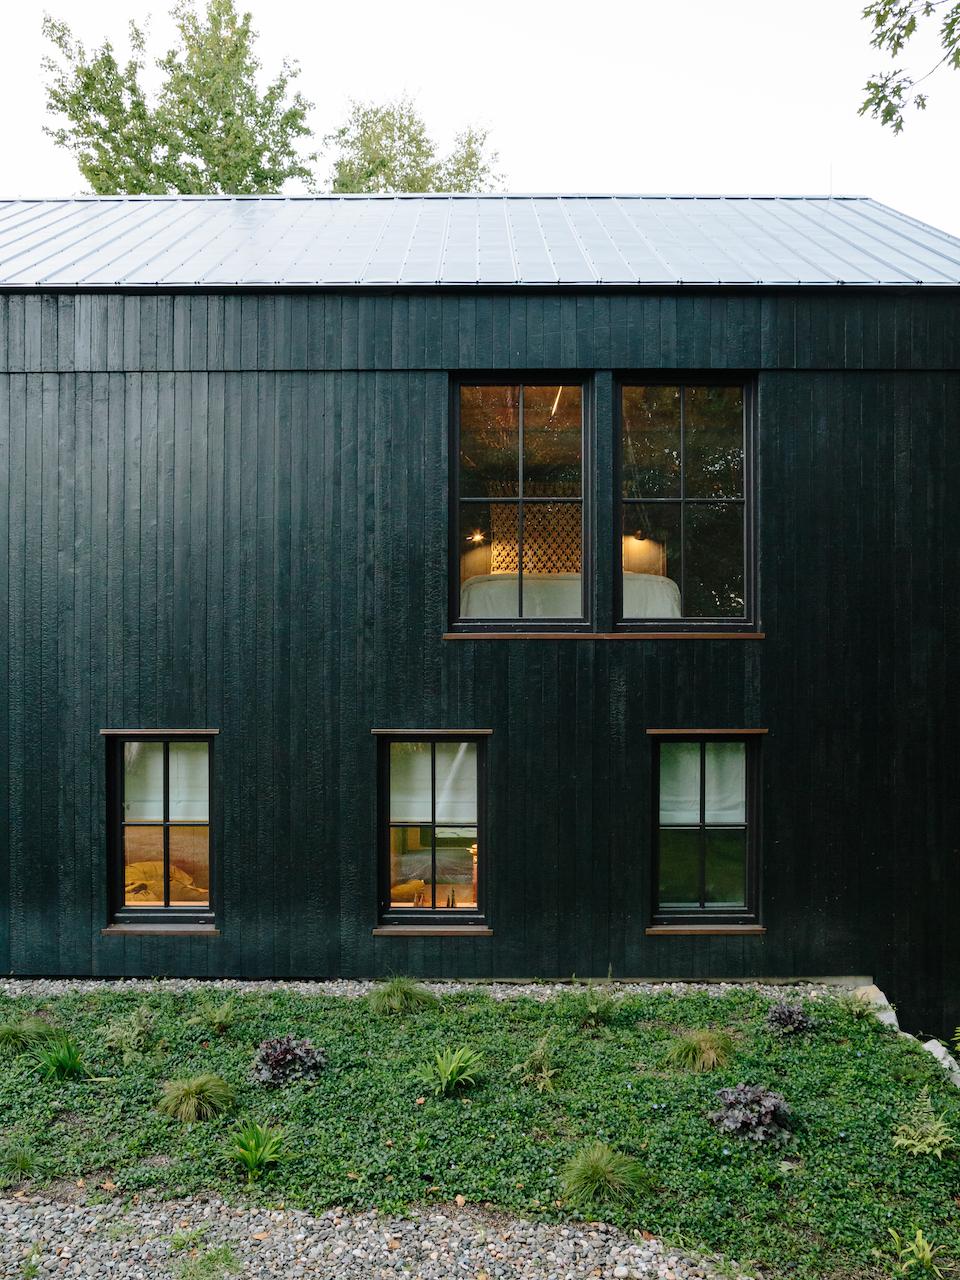 A 19th-Century Barn Transformed Into An Sustainable Home In New York’s Hudson Valley